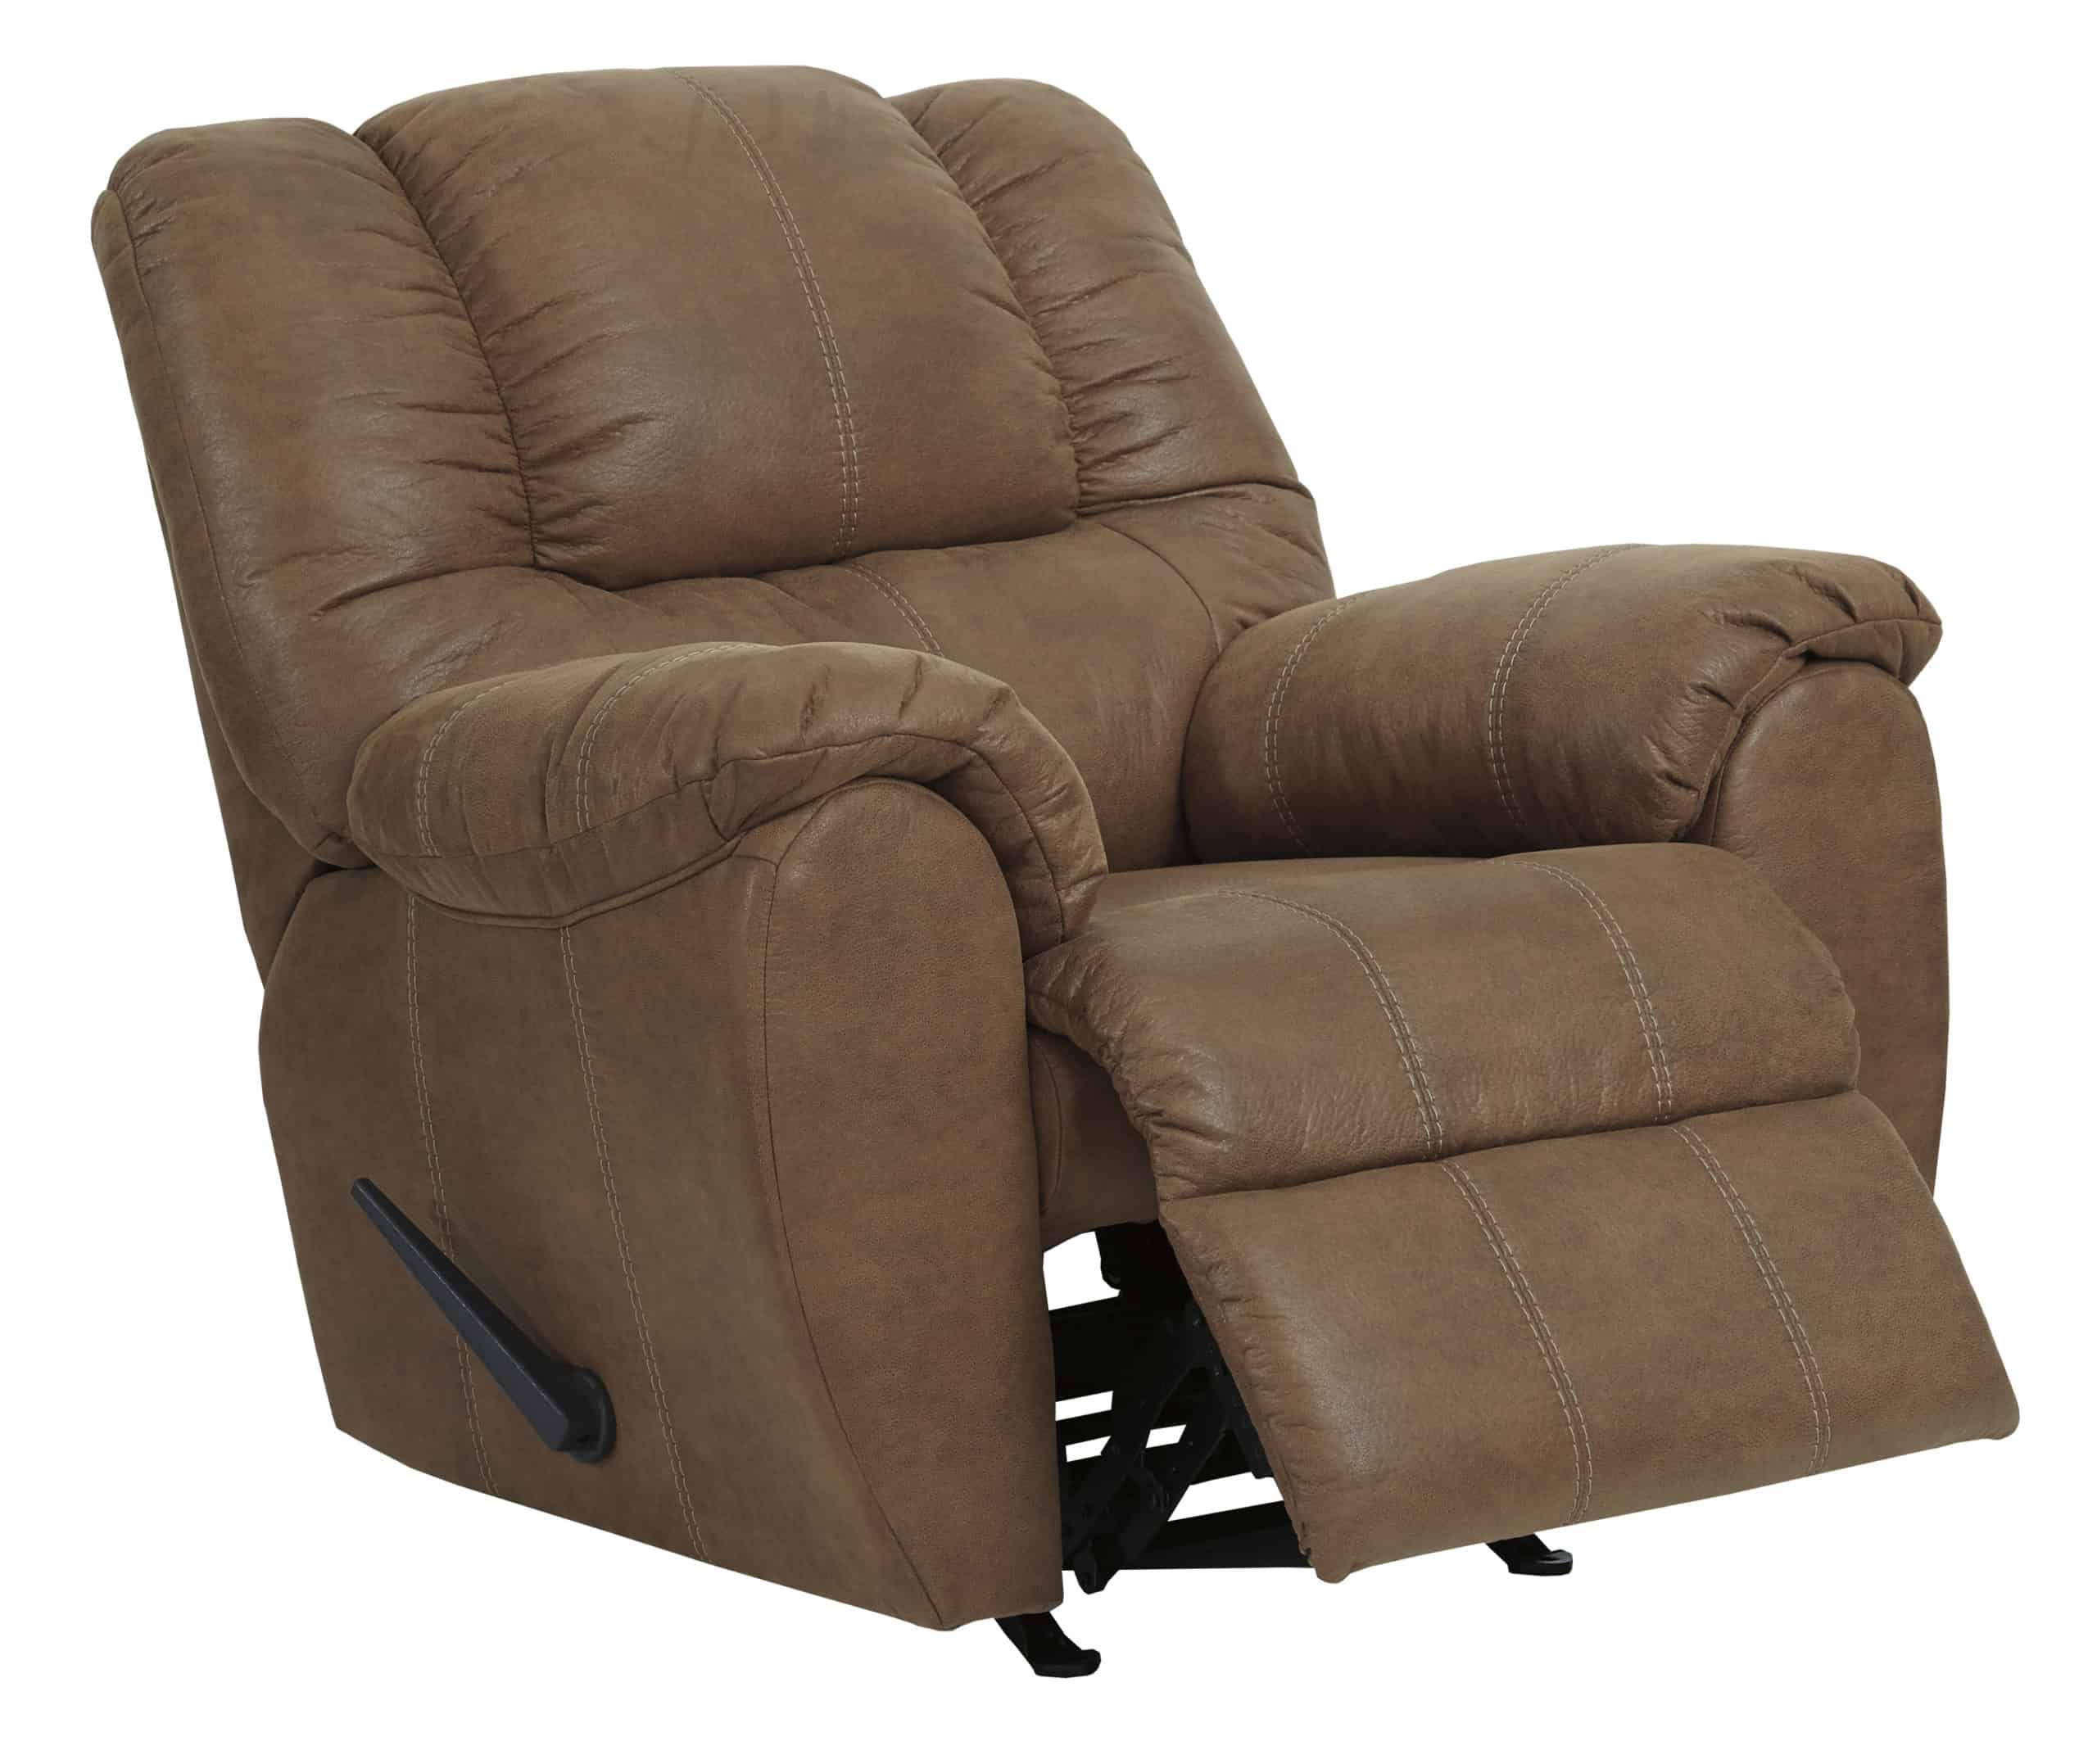 Rock the cool look of leather and the warm feel of fabric with this rocker recliner.